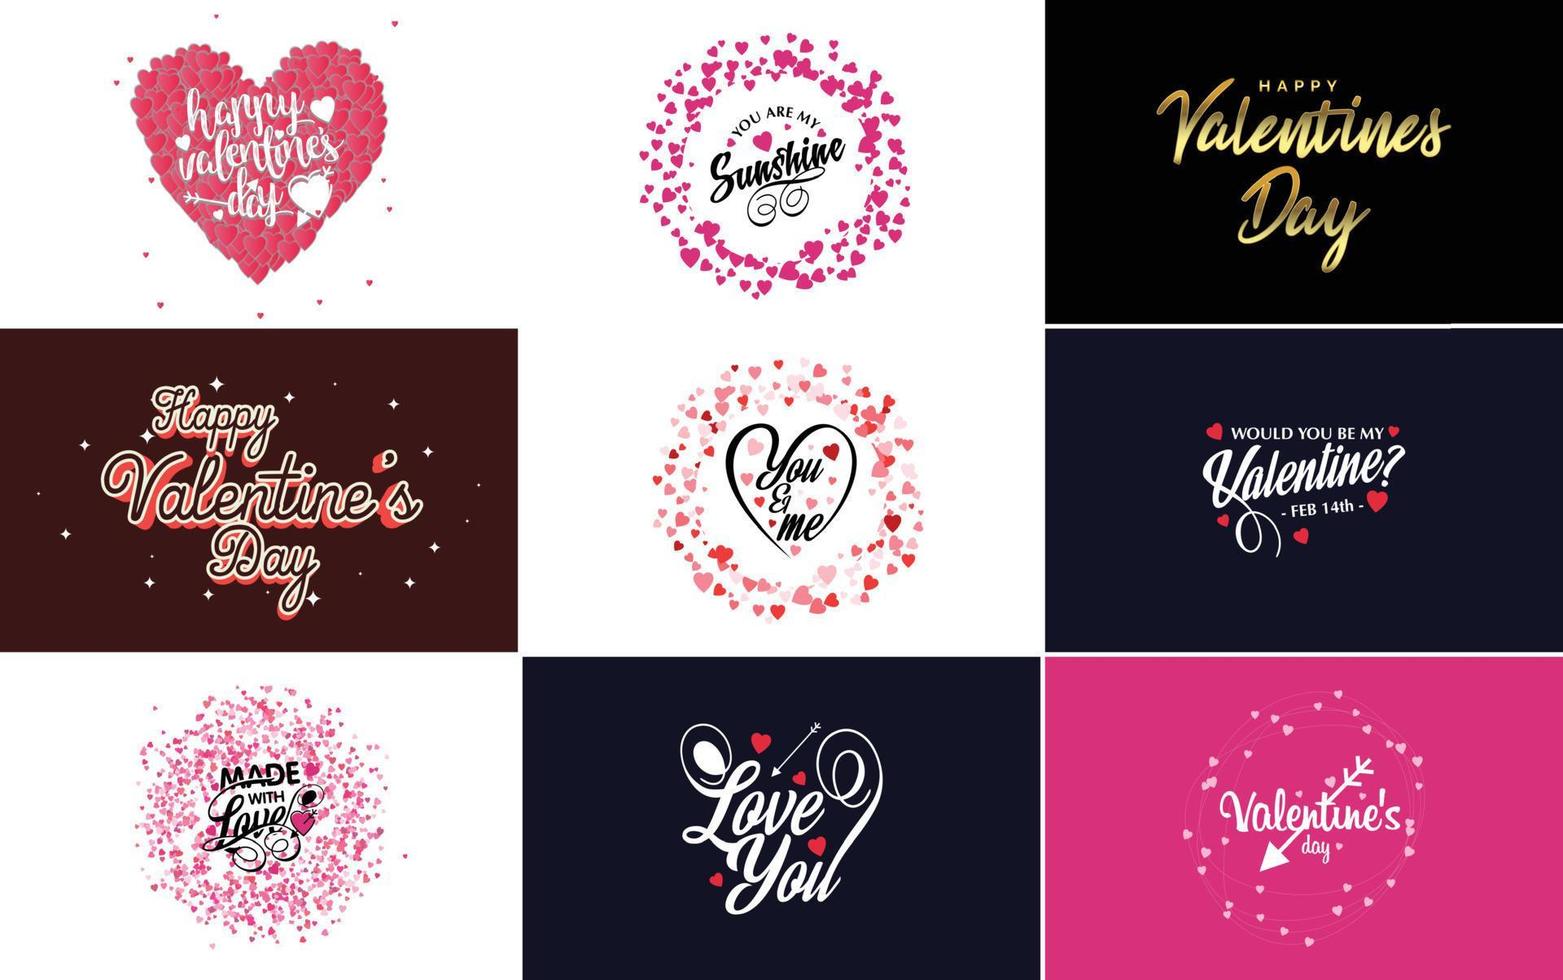 Valentine's hand-drawn lettering with a heart design suitable for use as a Valentine's Day greeting or in romantic designs vector